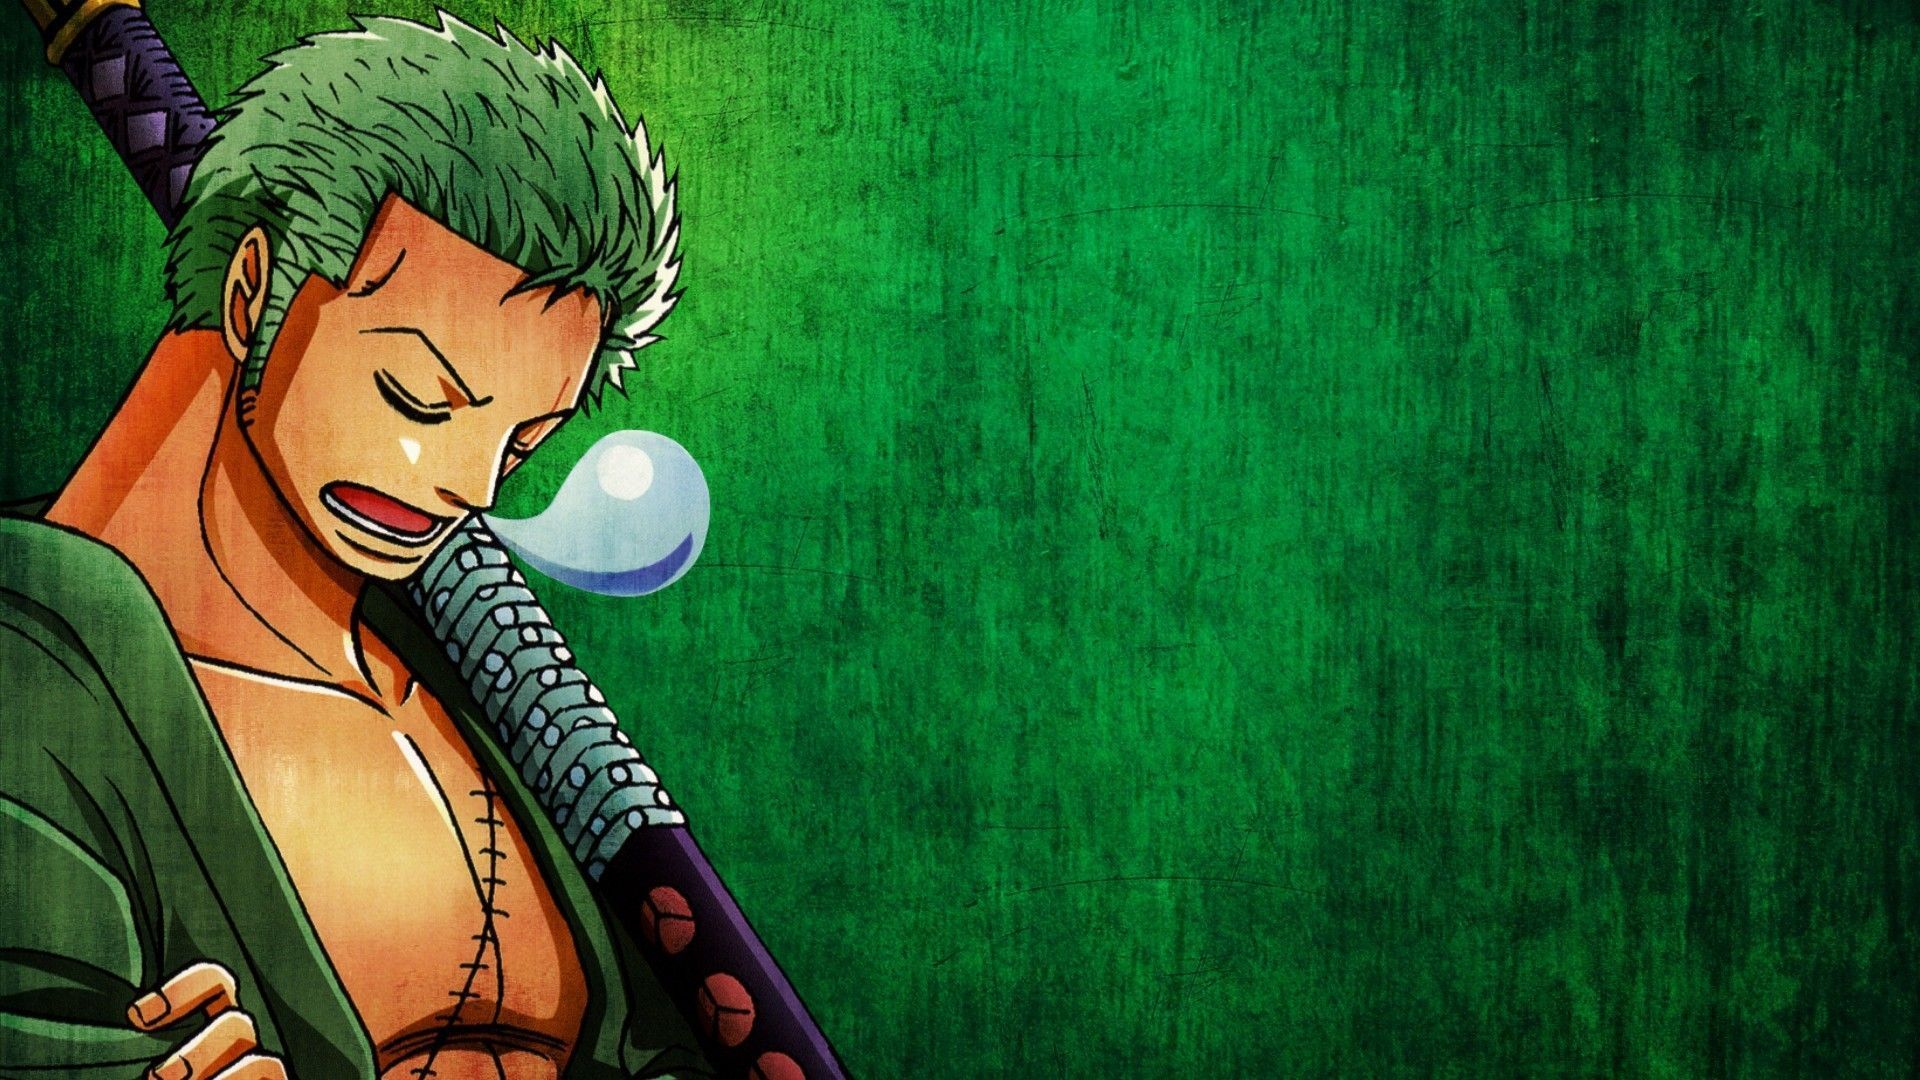 Anime Snatch, green background wallpapers and images - wallpapers